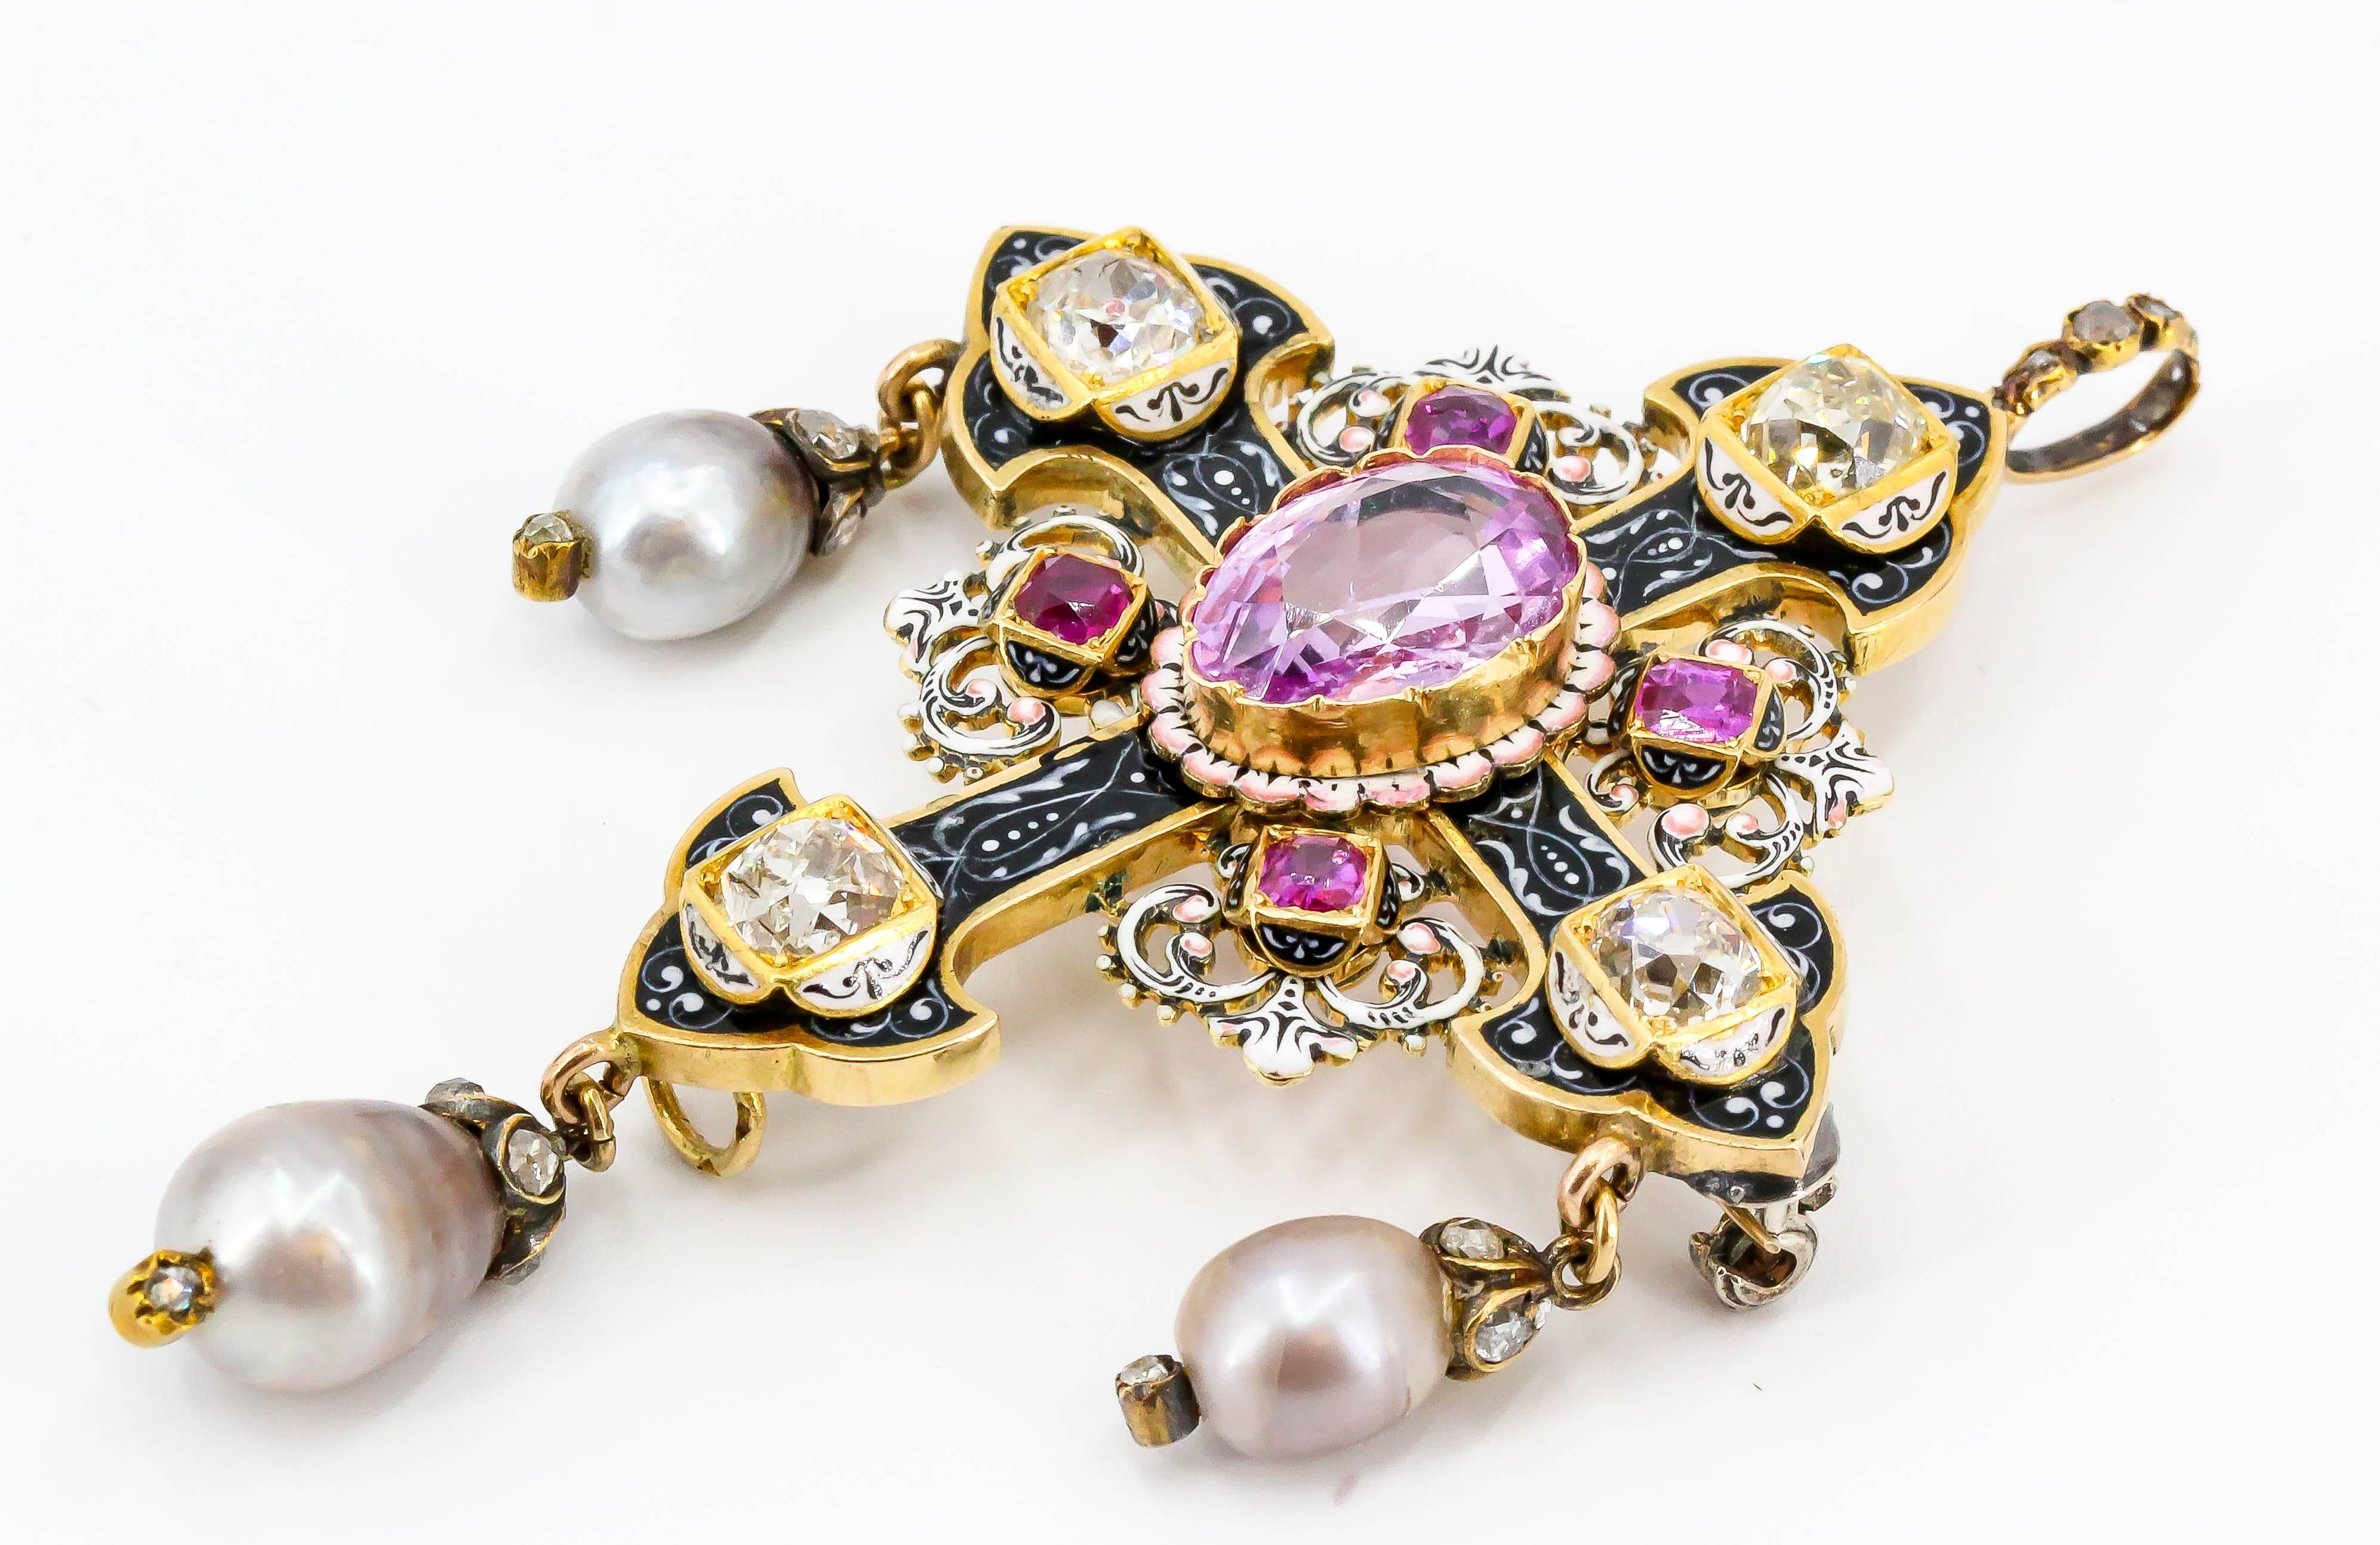 Rare and unusual pink sapphire, diamond, natural pearl and 18k yellow gold cross brooch from the Renaissance revival period (circa 1860-1875). It features a large, pink sapphire as a central stone, with sapphires around it and high grade old